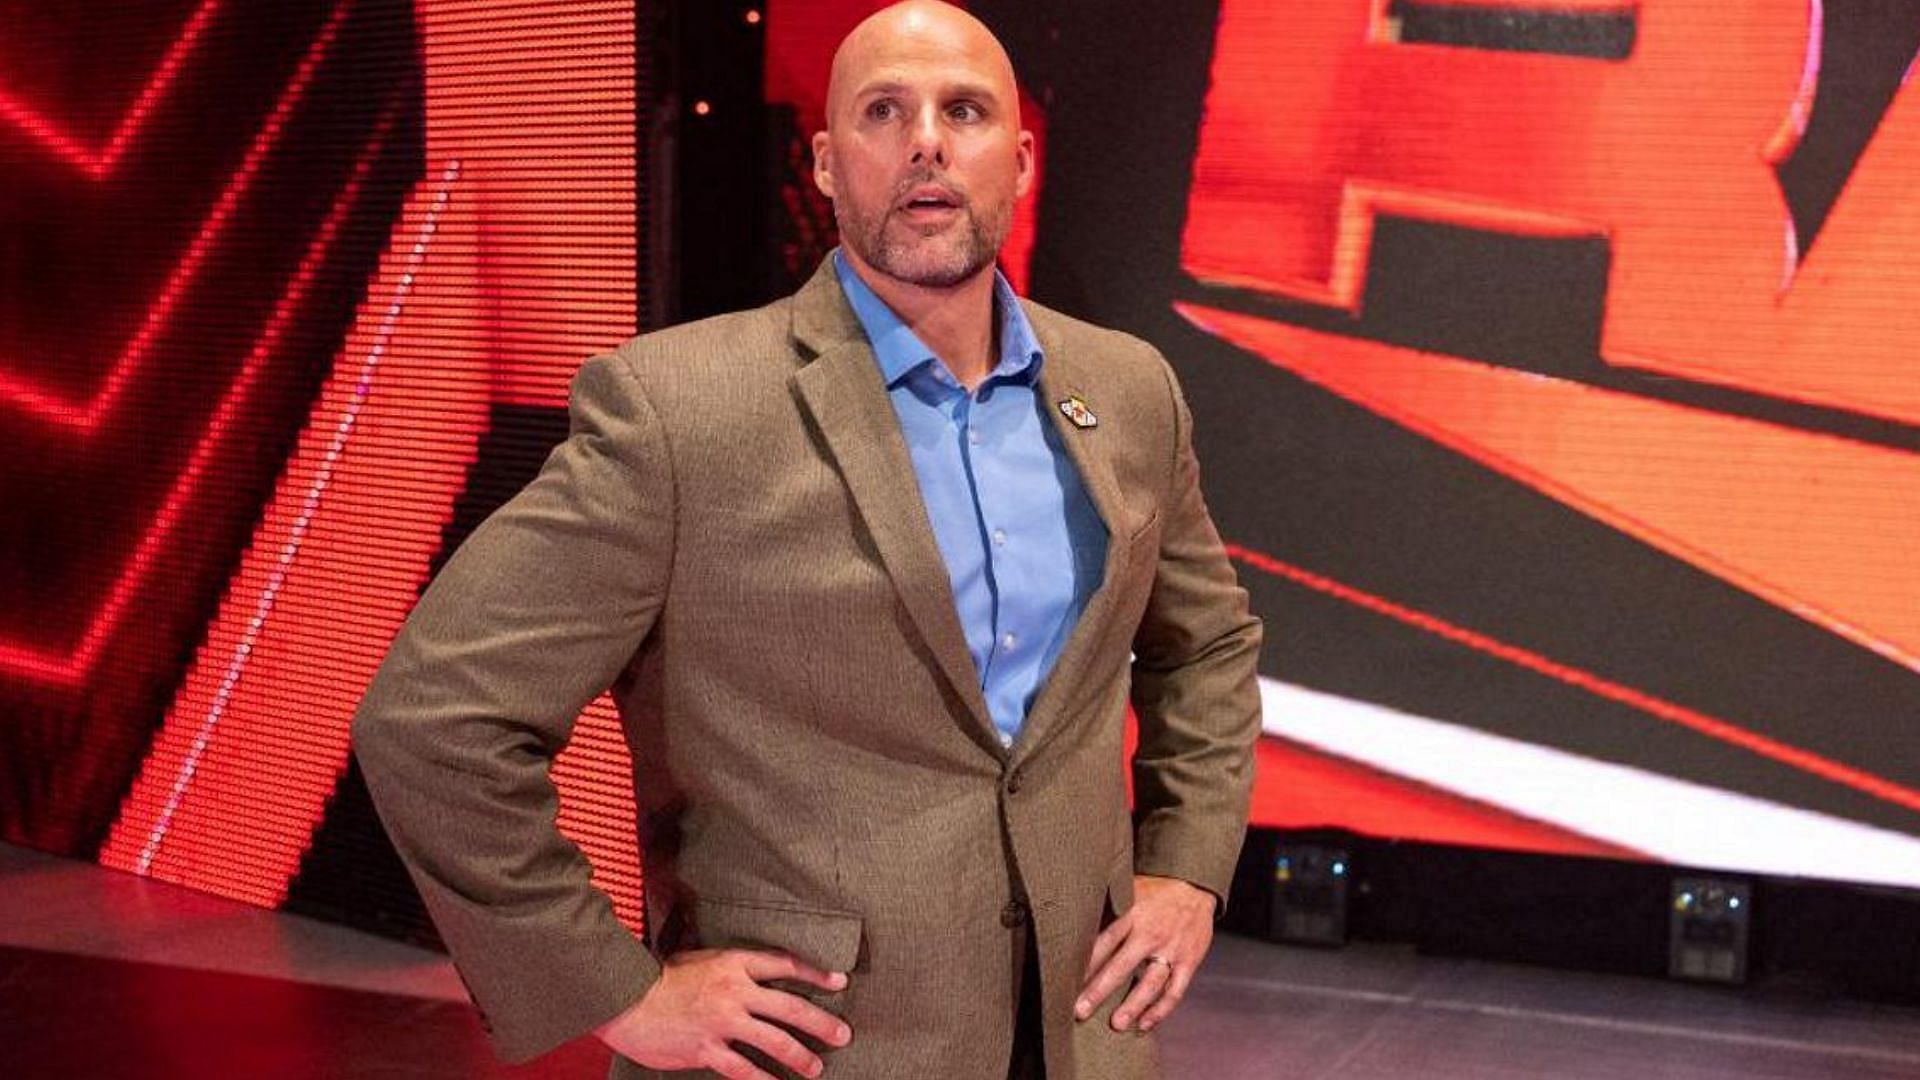 Adam Pearce is the general manager of WWE RAW.